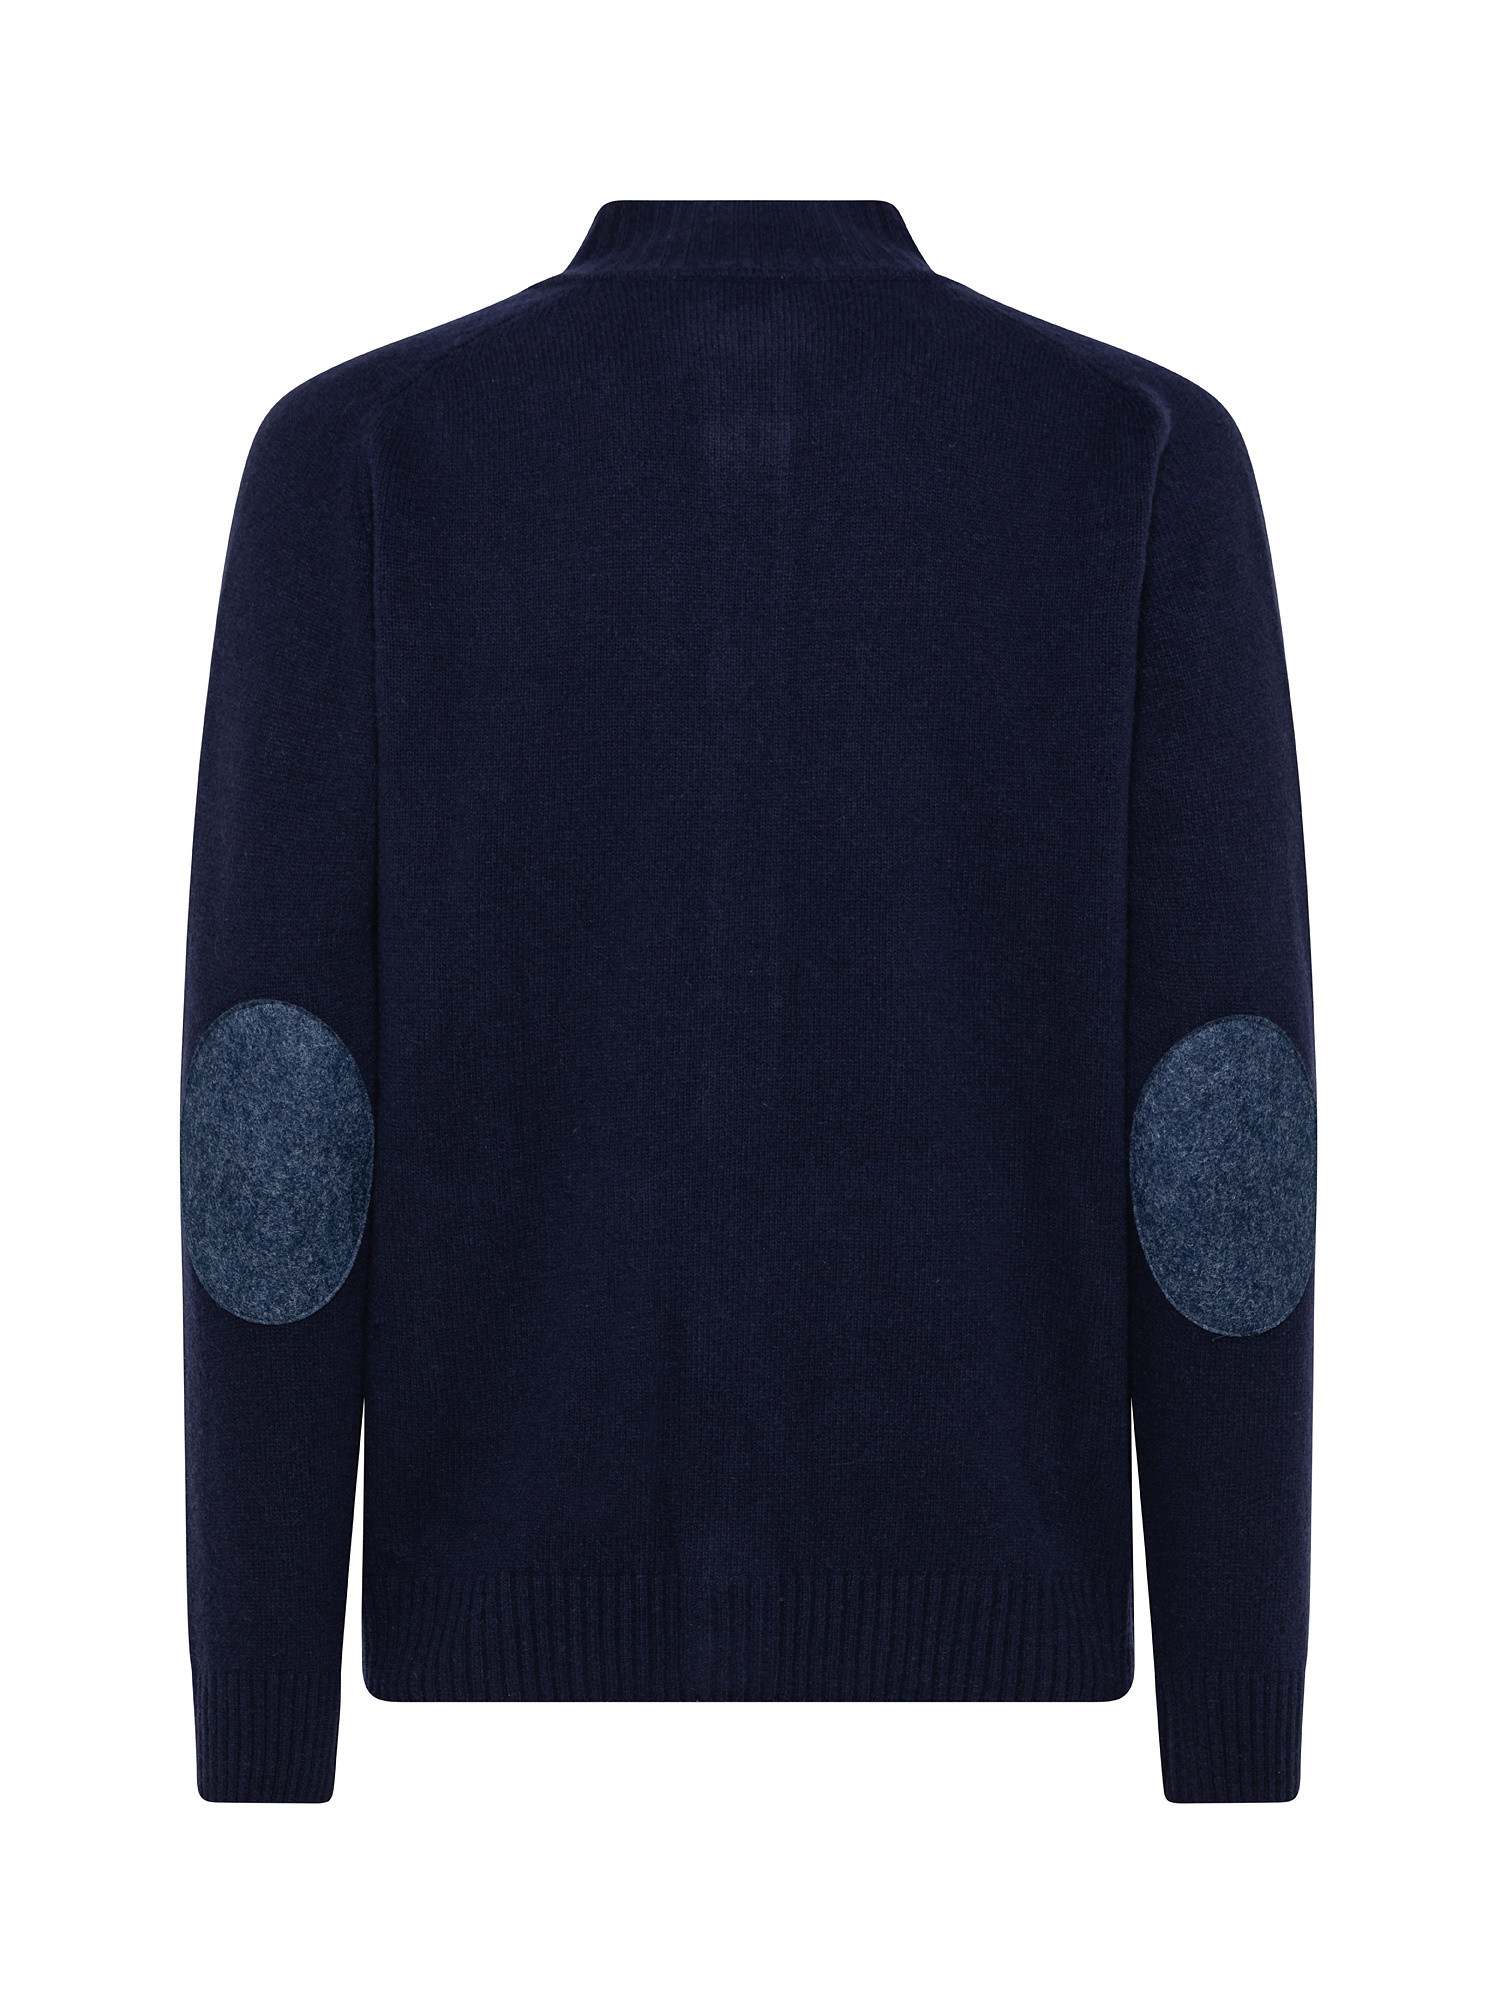 Wool blend cardigan with buttons, Dark Blue, large image number 1